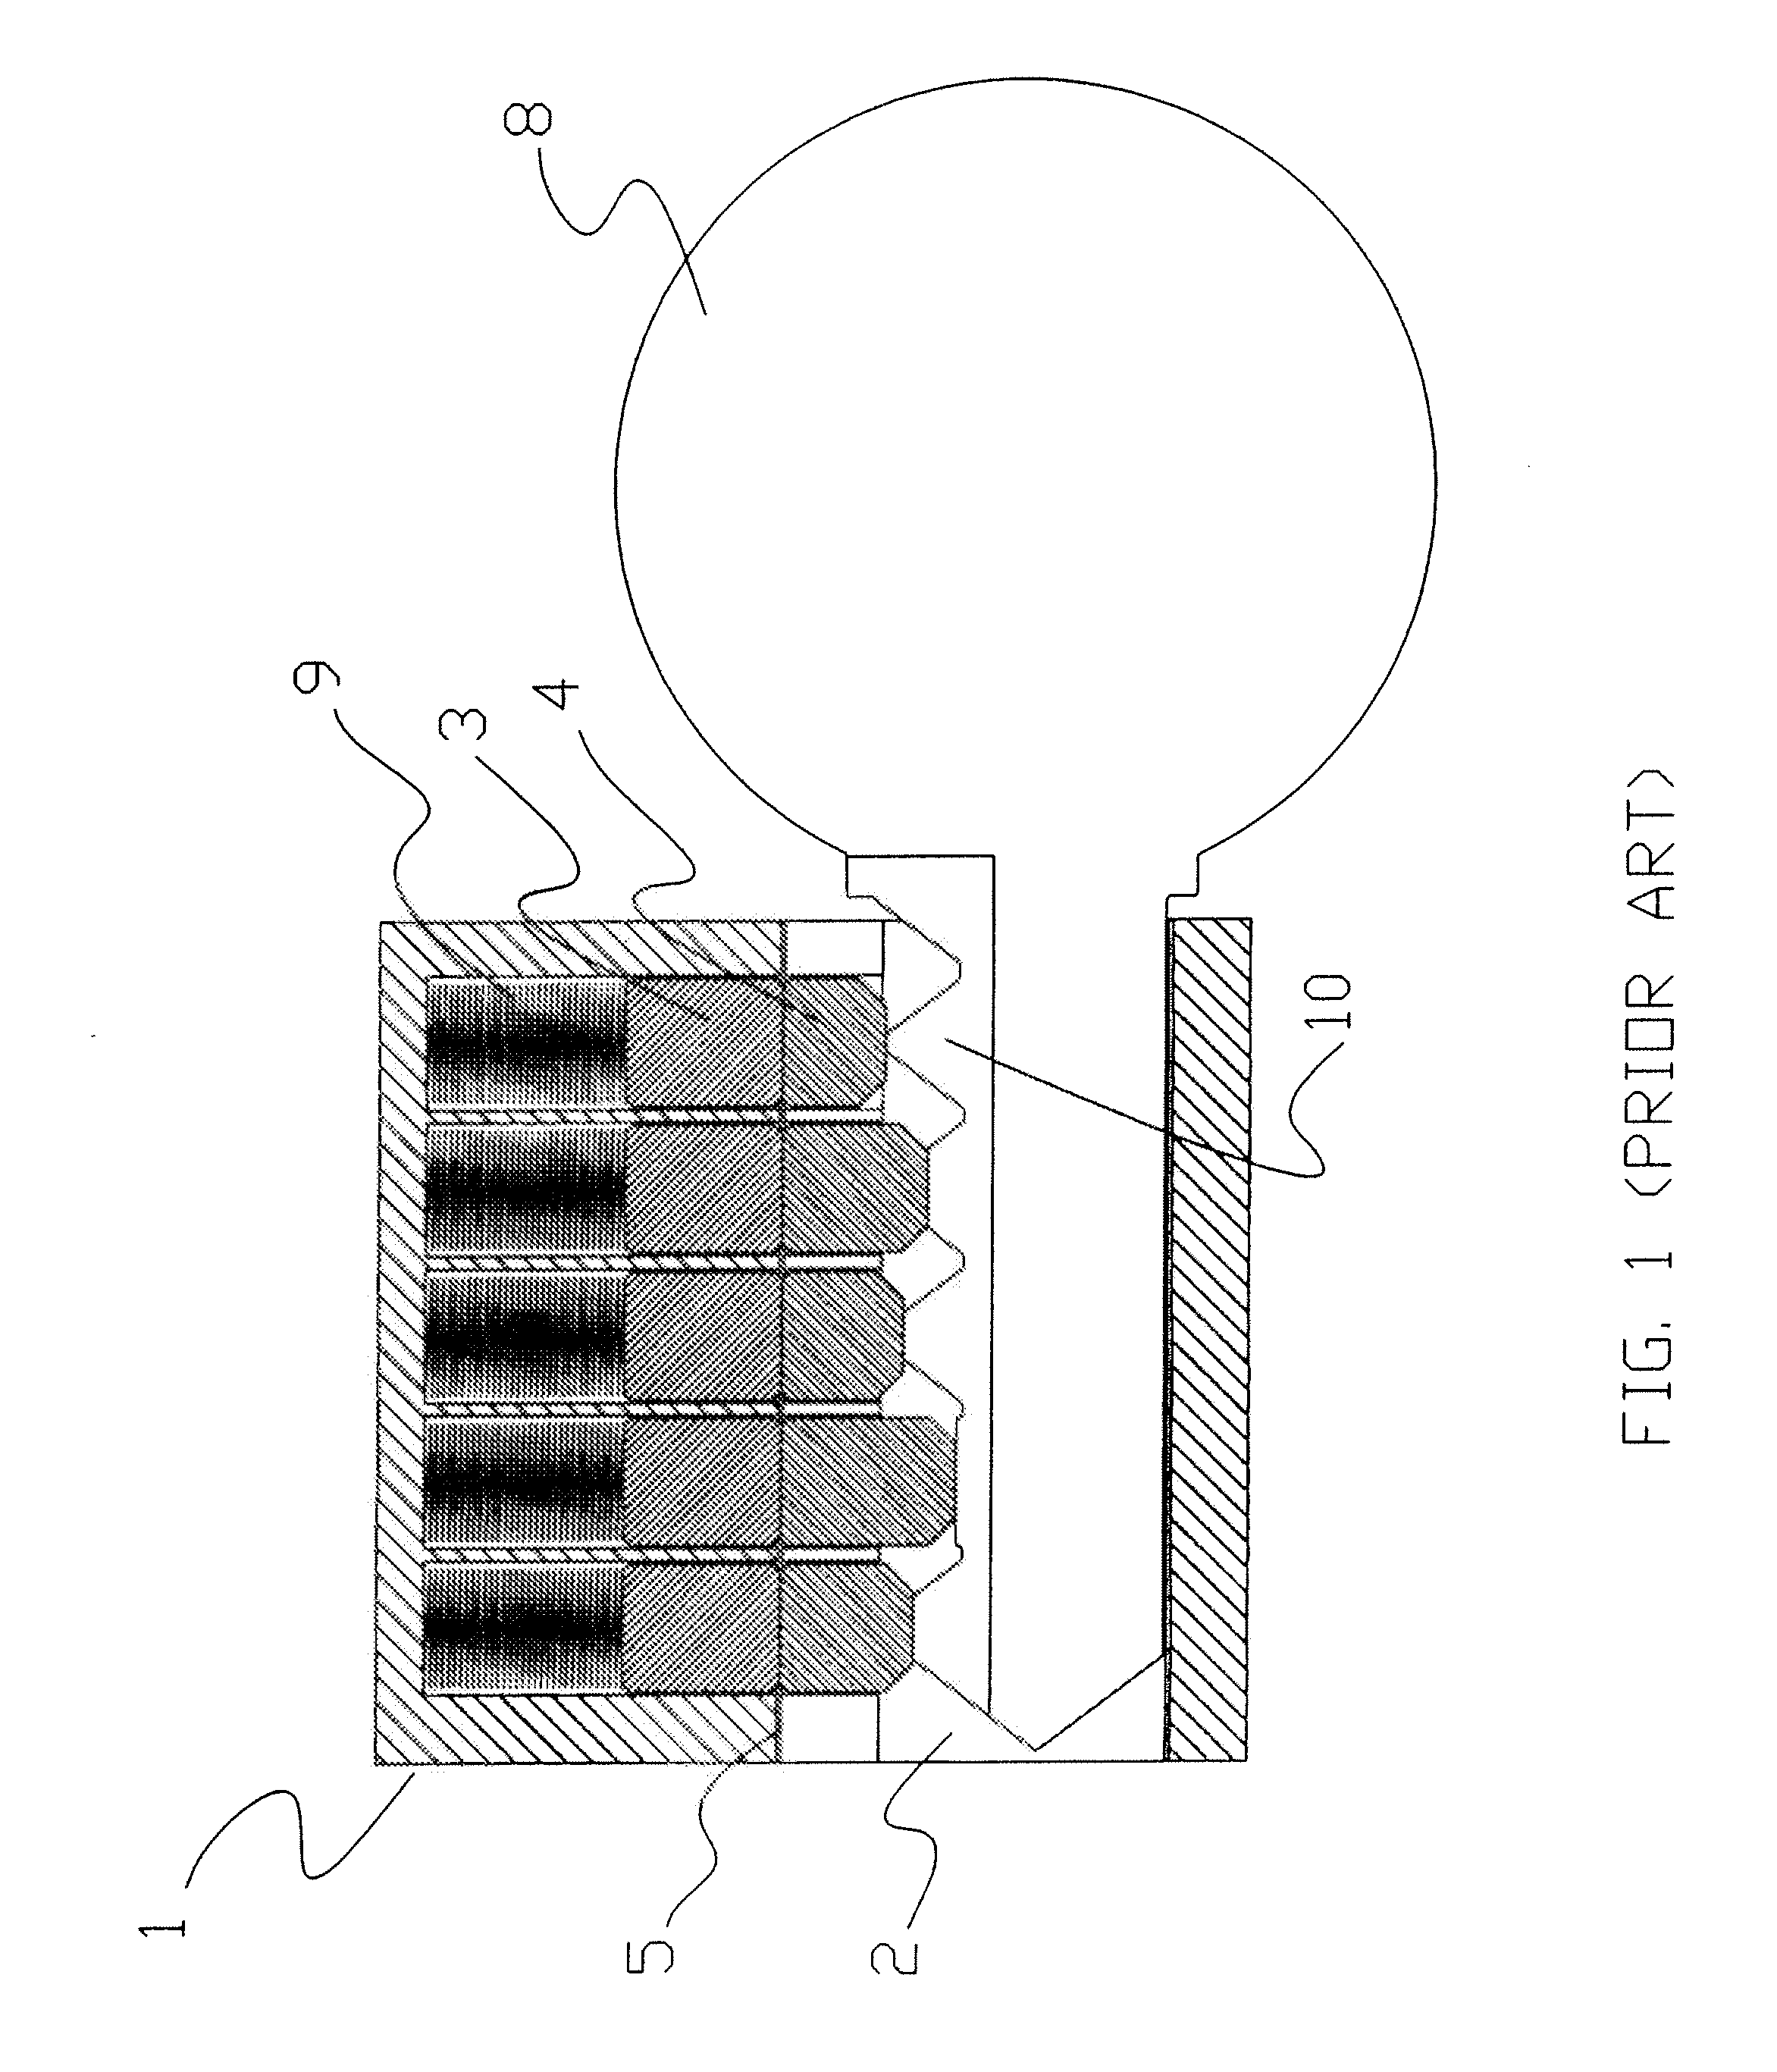 Method and Assembly to Prevent Impact-Driven Lock Manipulation of Cylinder Locks